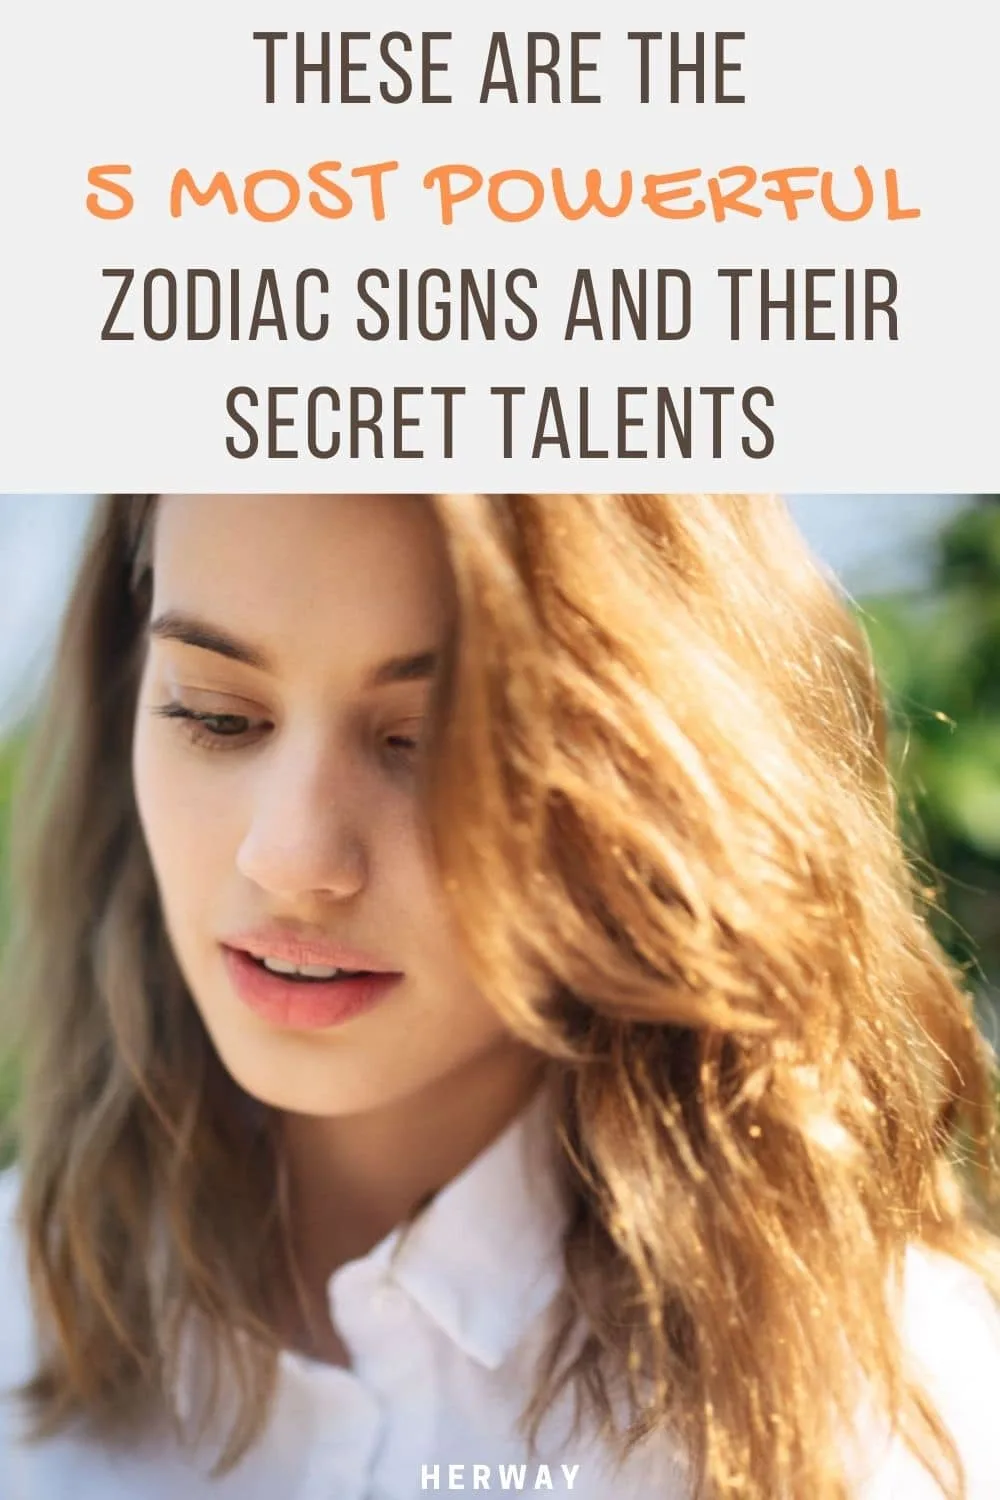 These Are The 5 Most Powerful Zodiac Signs And Their Secret Talents